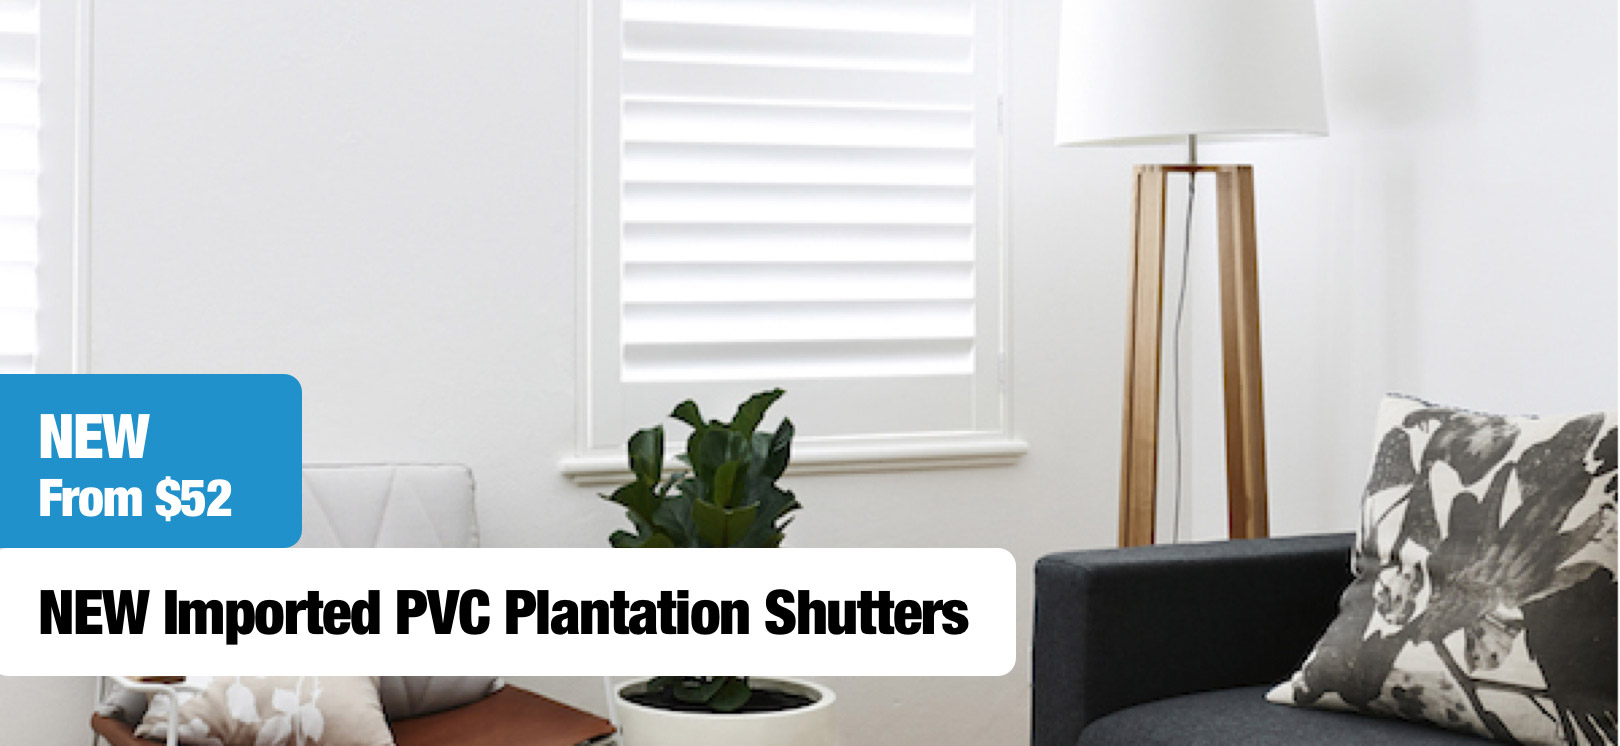 NEW Imported PVC Plantation Shutters From $52